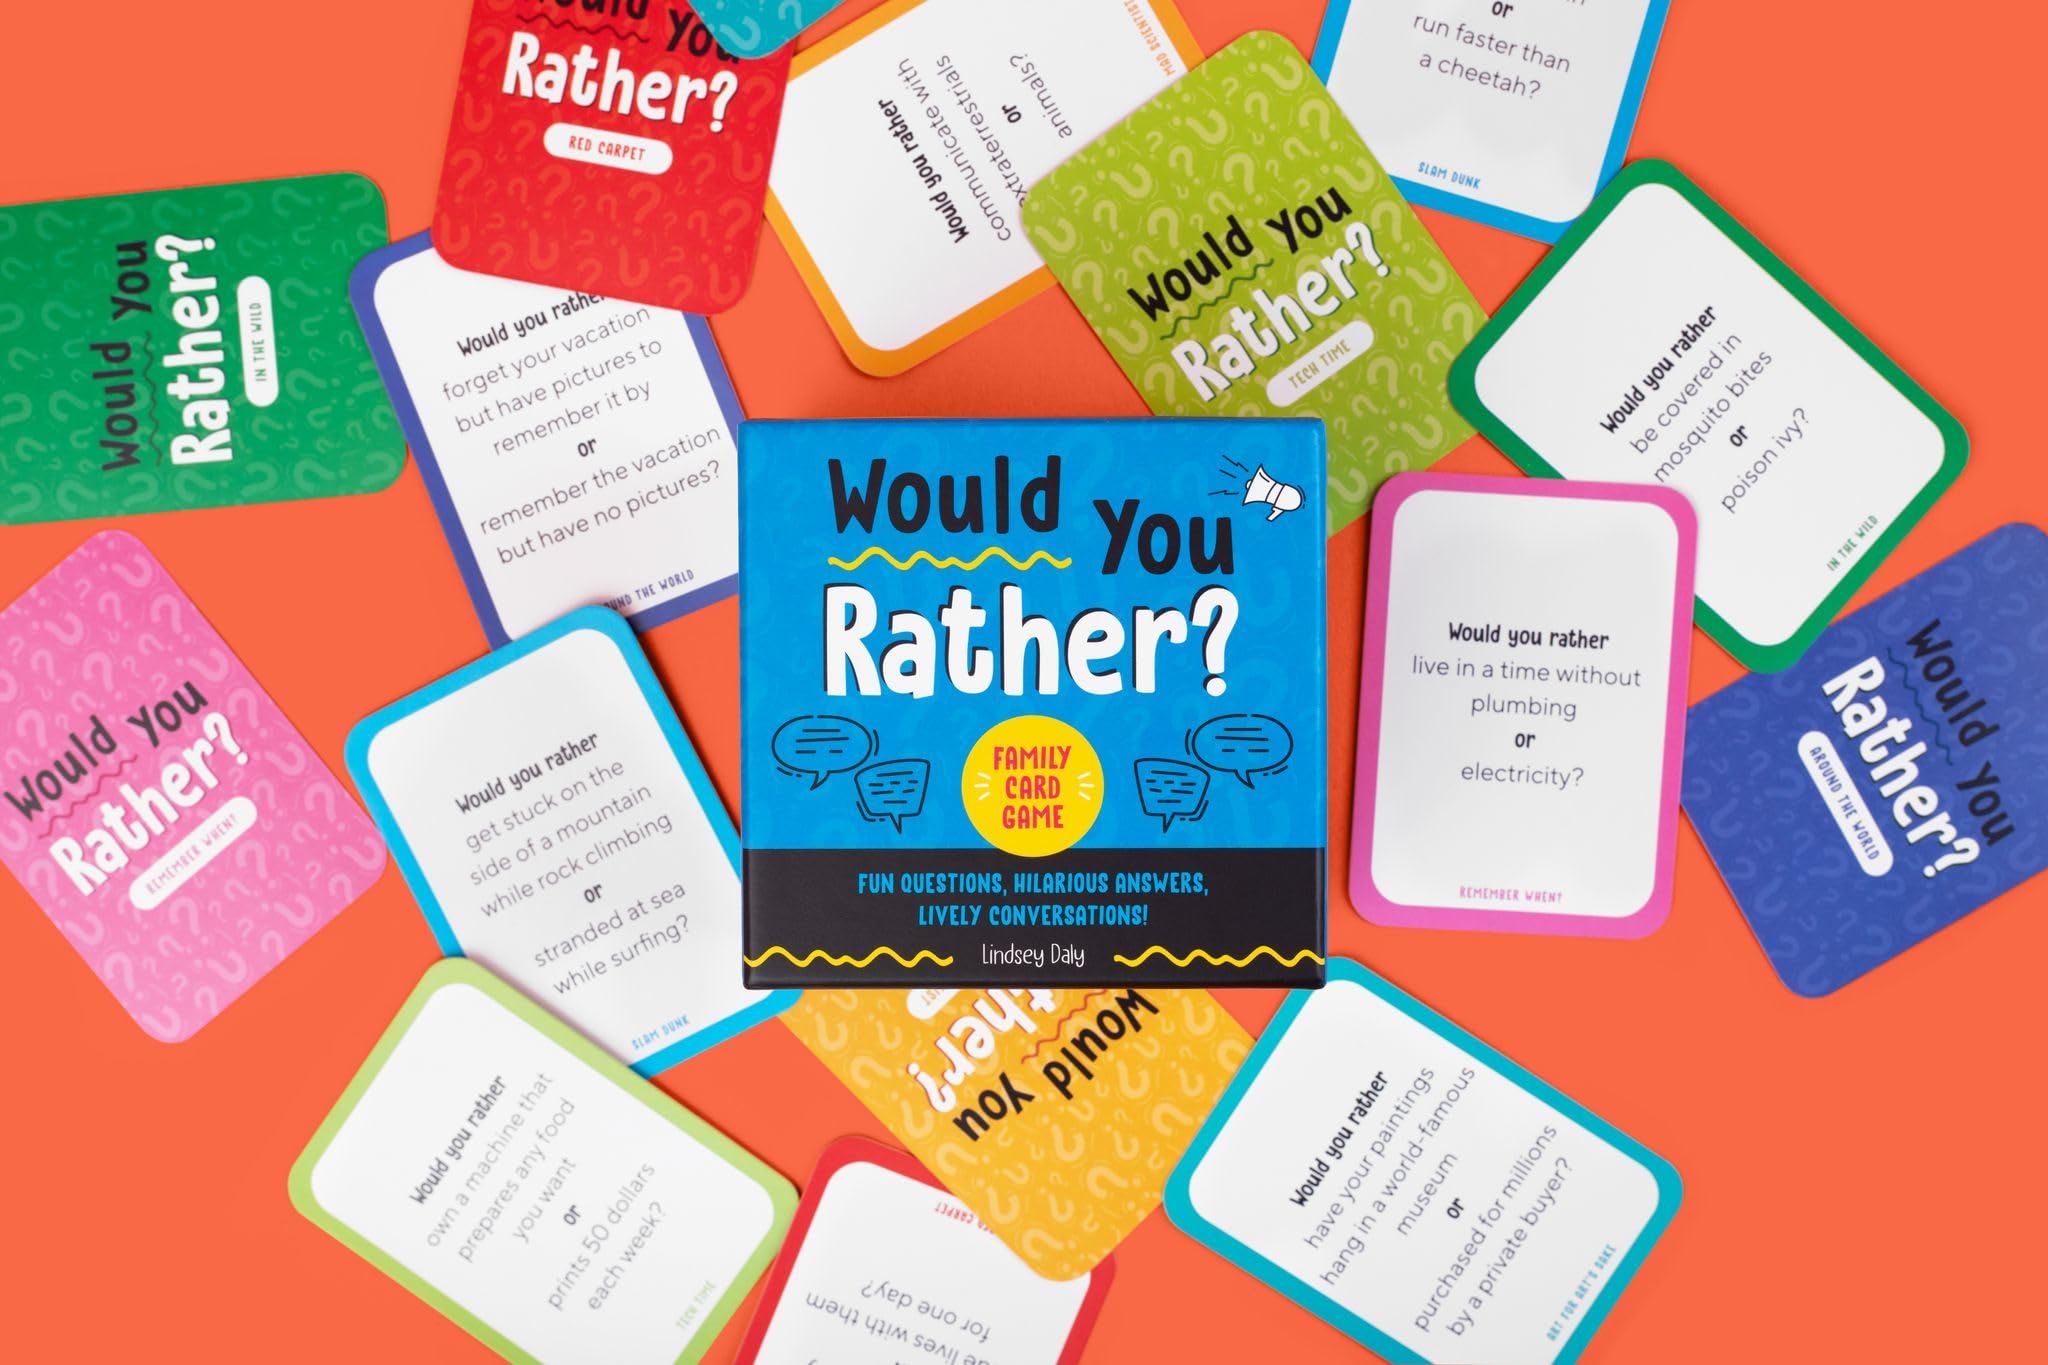 Would You Rather? Family Card Game: Fun Questions, Hilarious Answers, Lively Conversations!